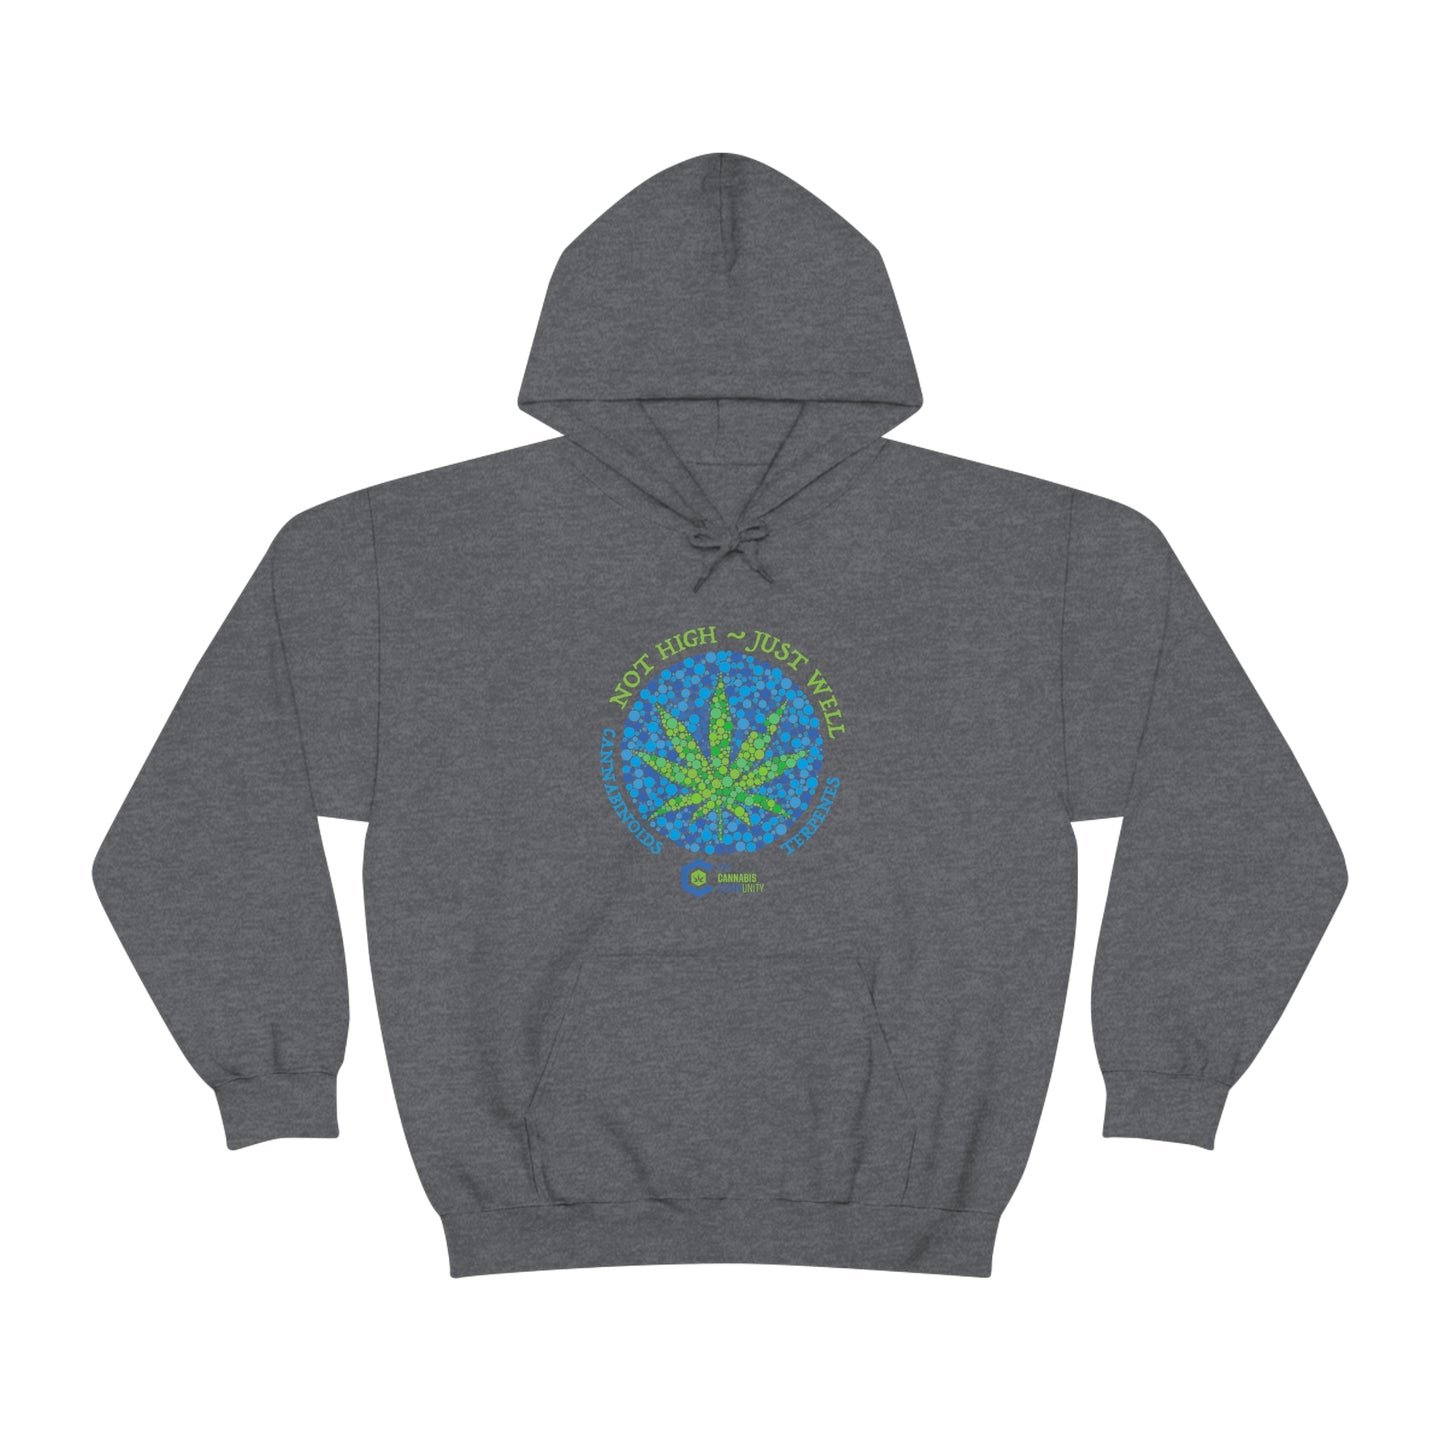 A Dark Heather, Not High, Just Well Cannabis Hoodie with a green and blue marijuana leaf on it.